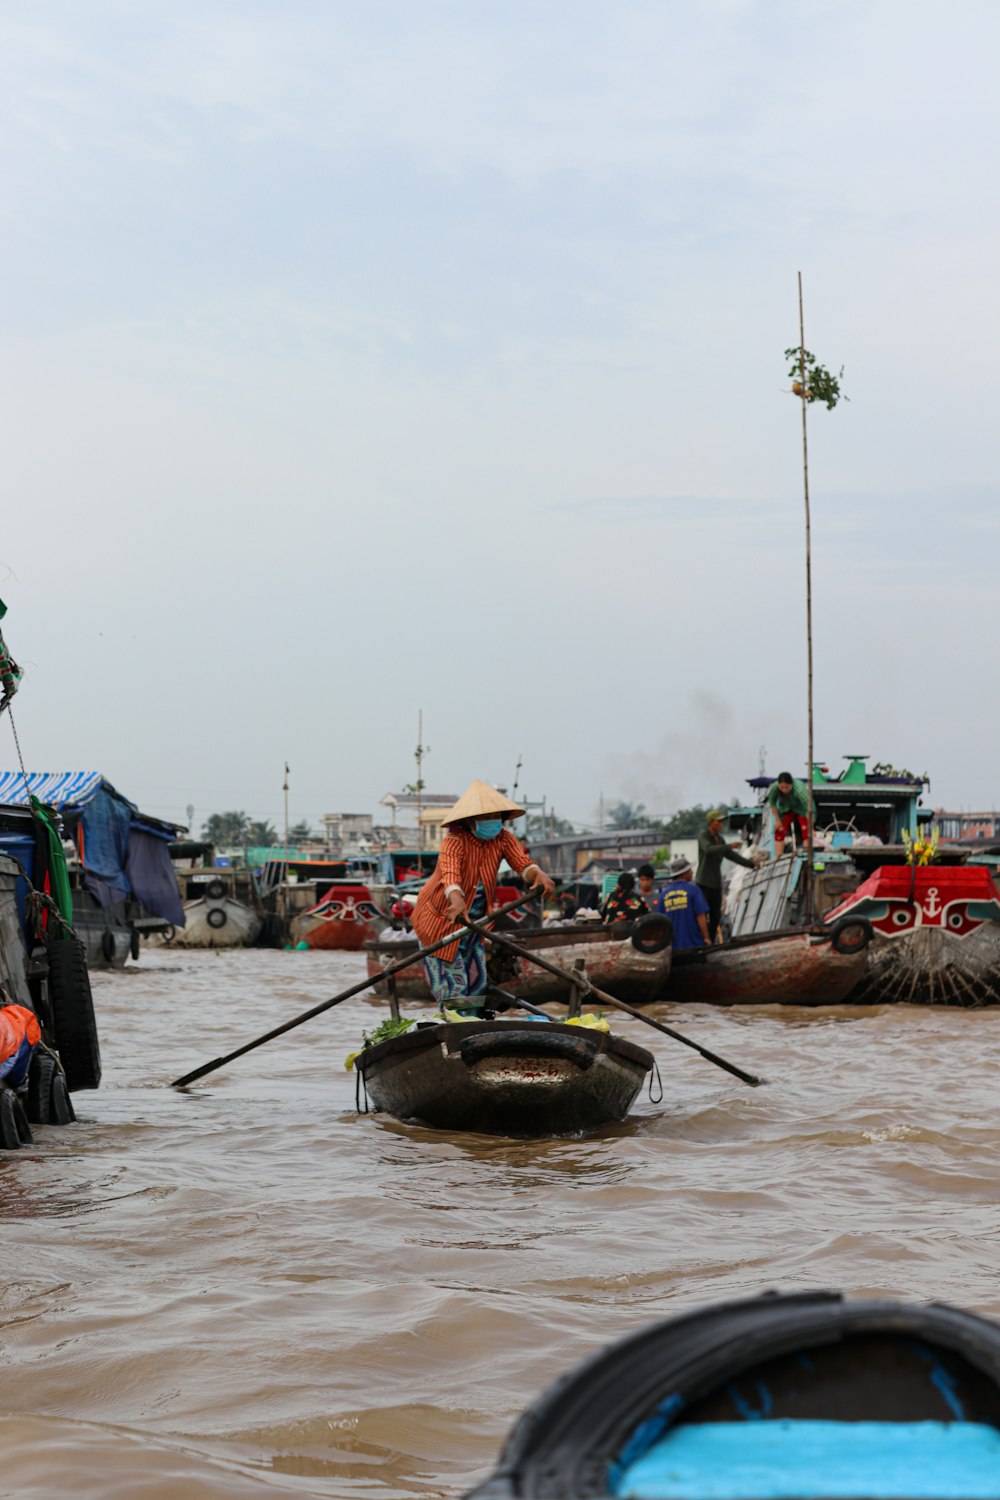 a group of people riding on top of boats in the water